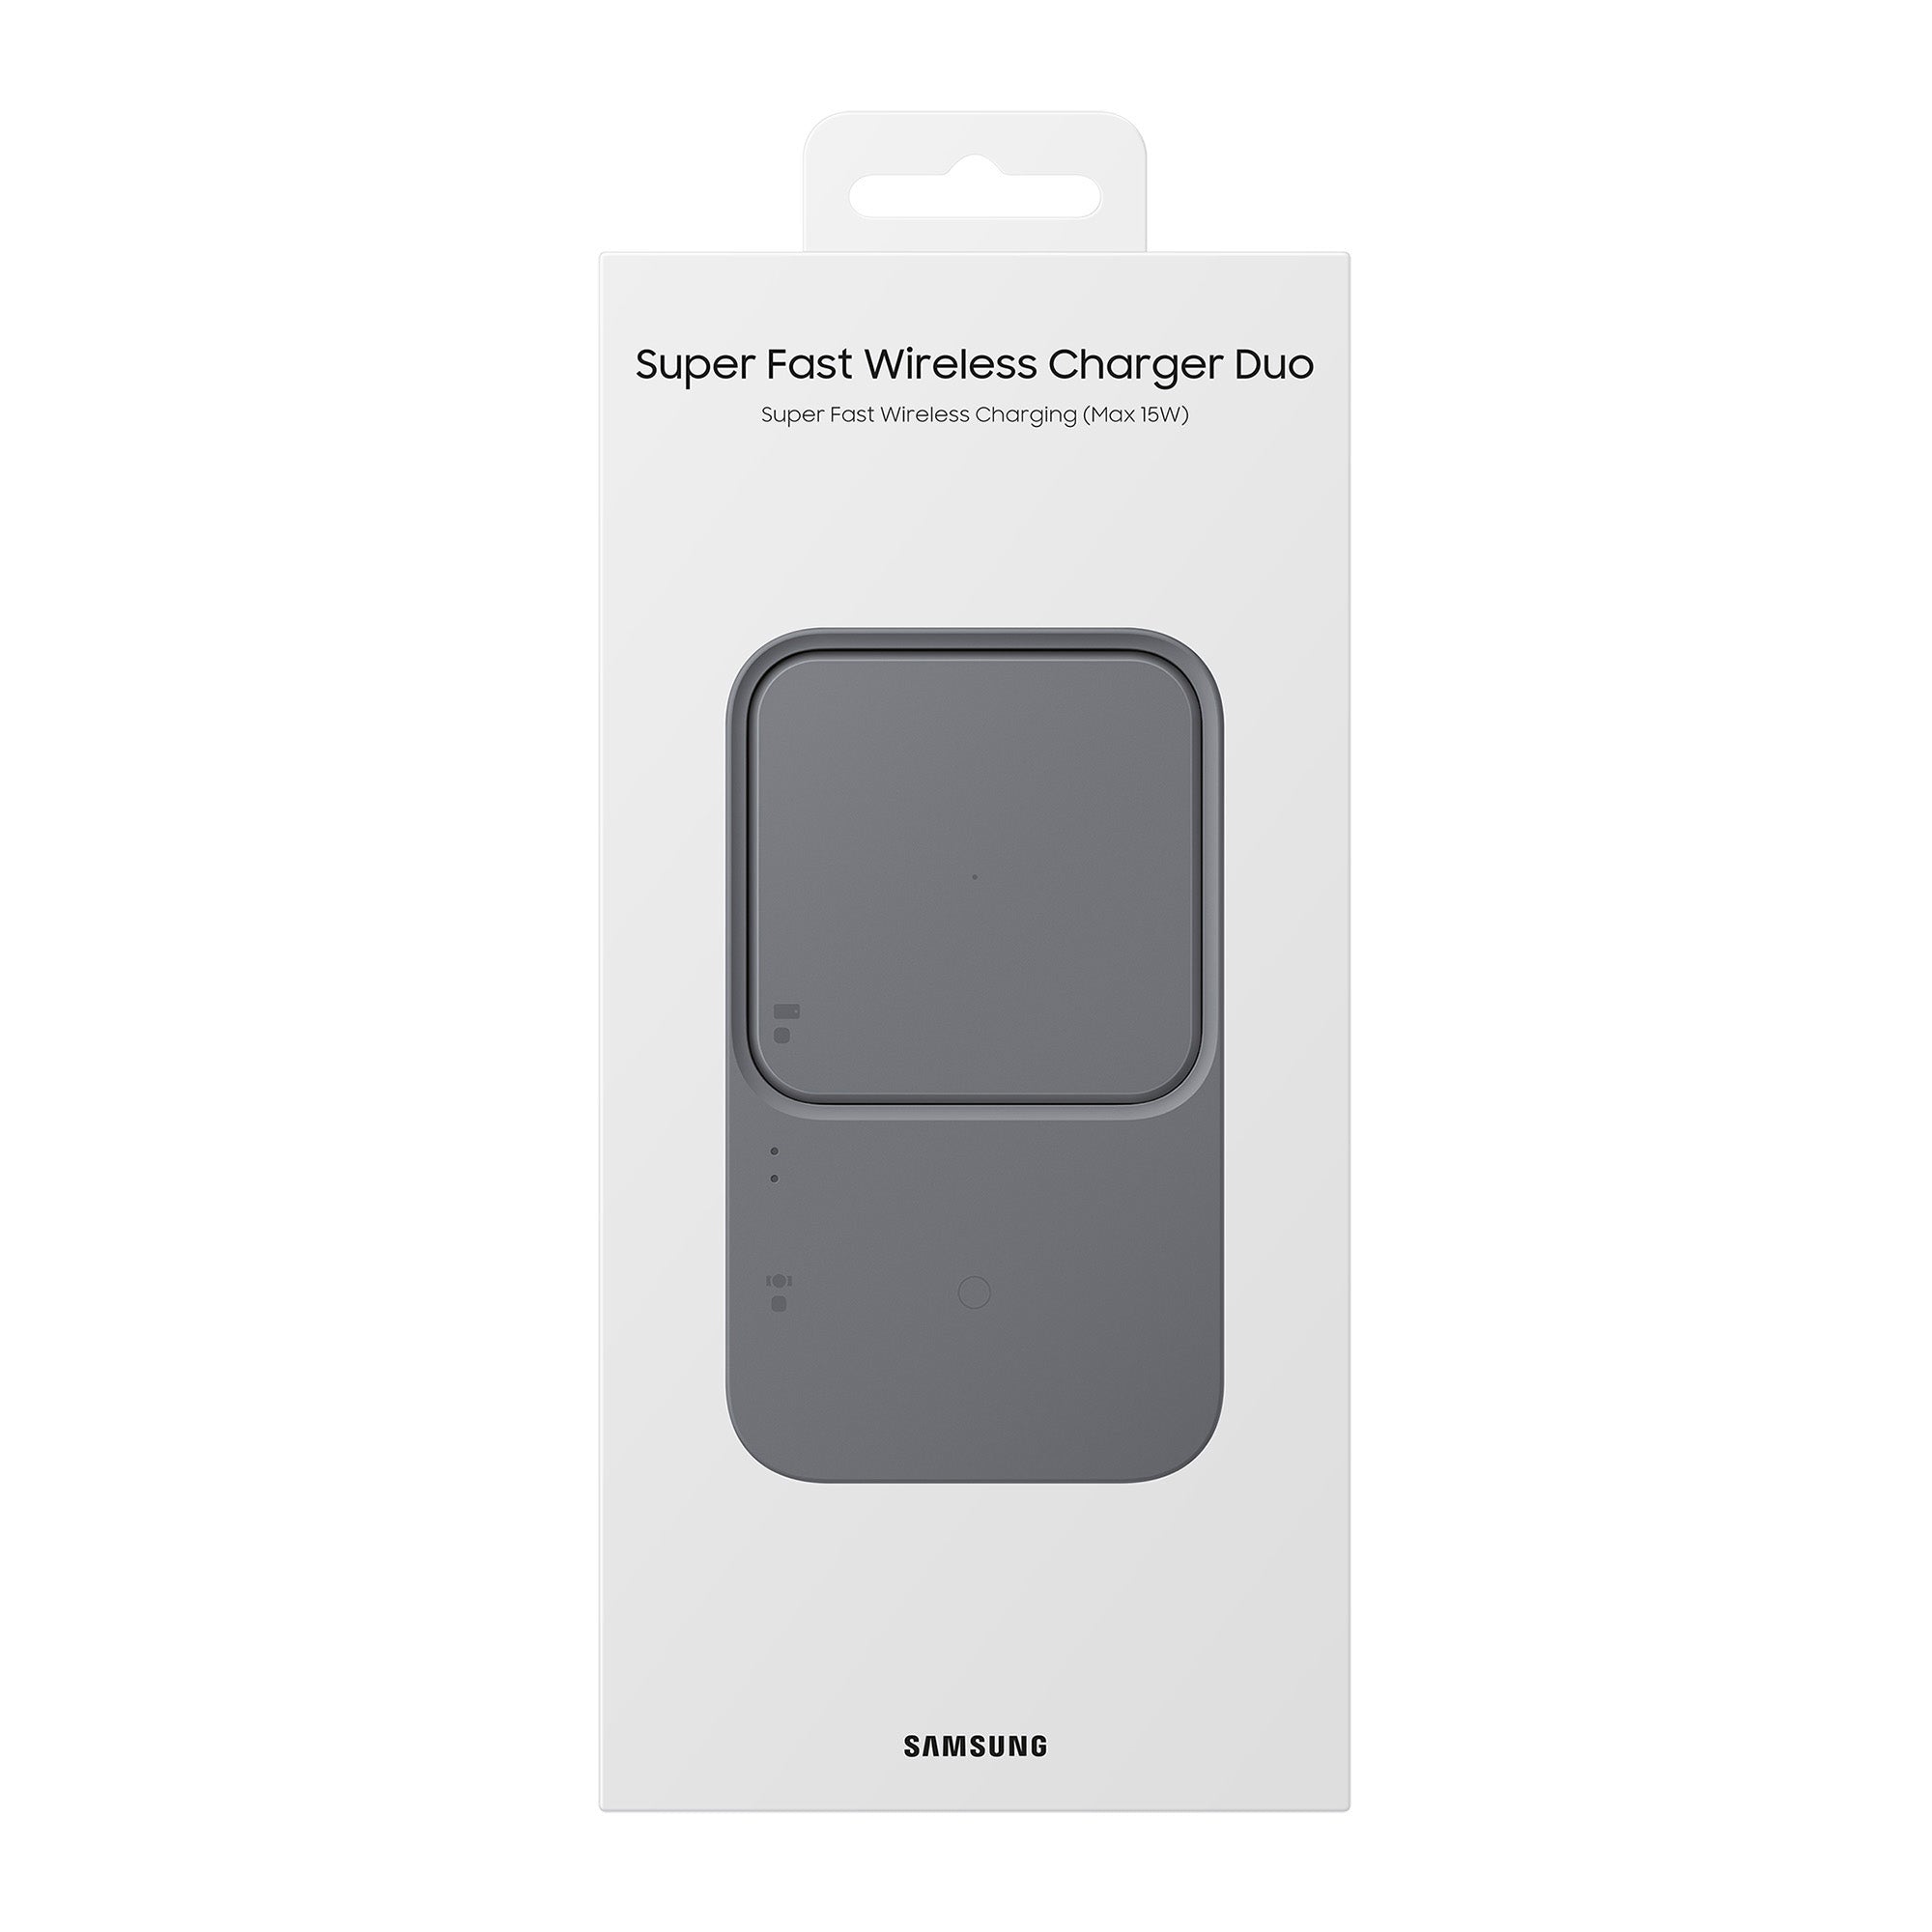 Samsung OEM 15W Duo Wireless Charger - Black - 15-09847